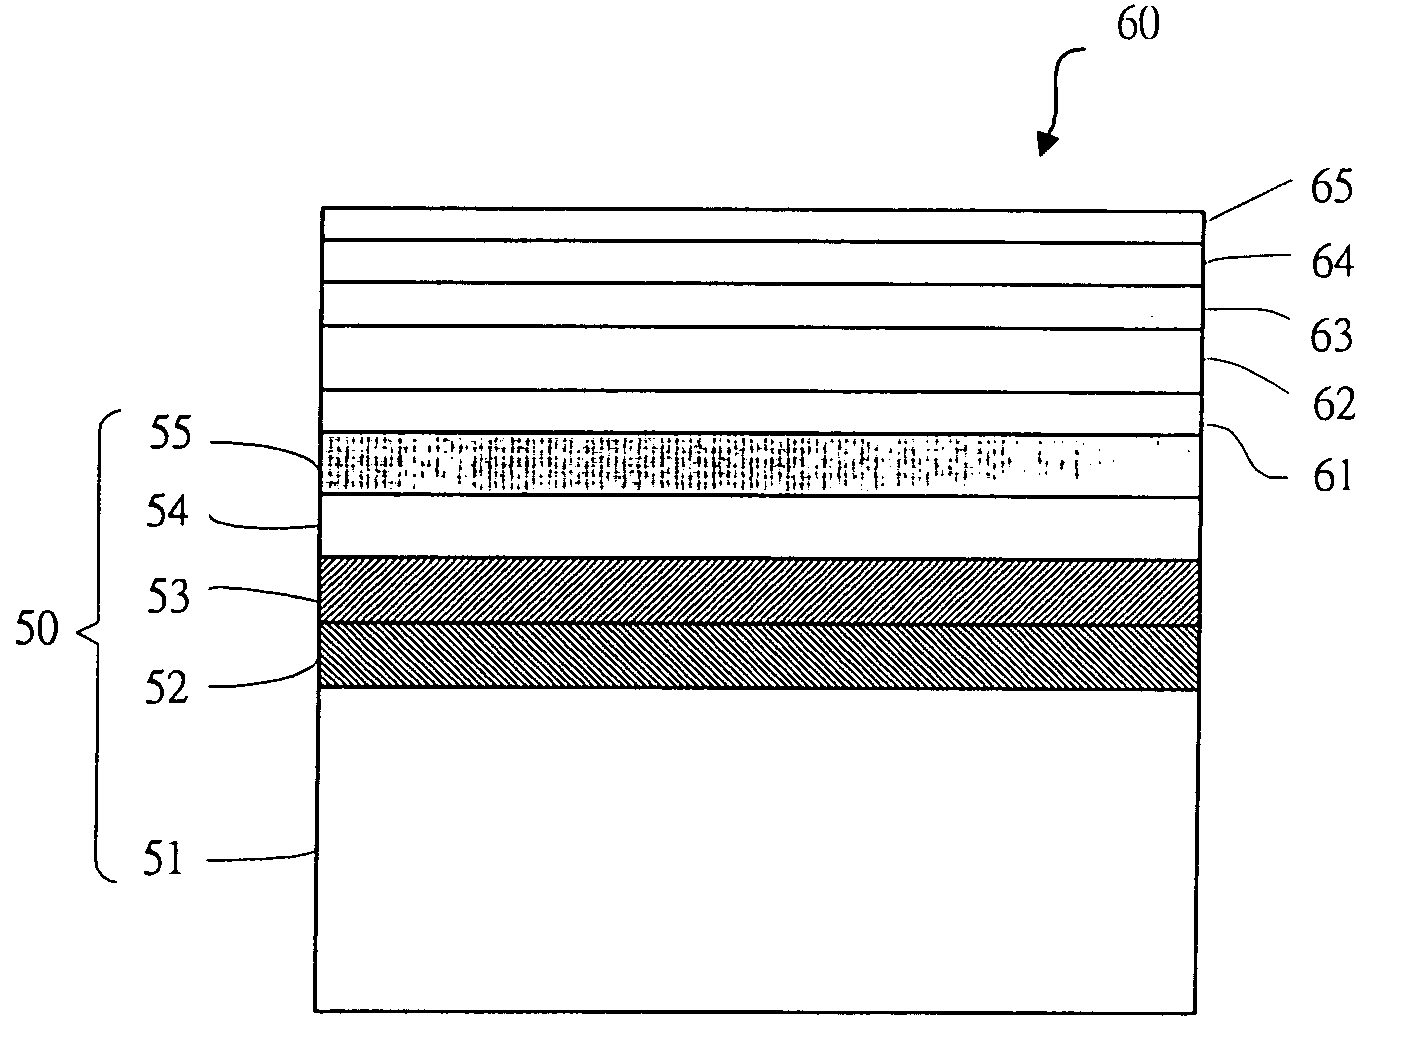 Method for fabricating a compound semiconductor epitaxial wafer